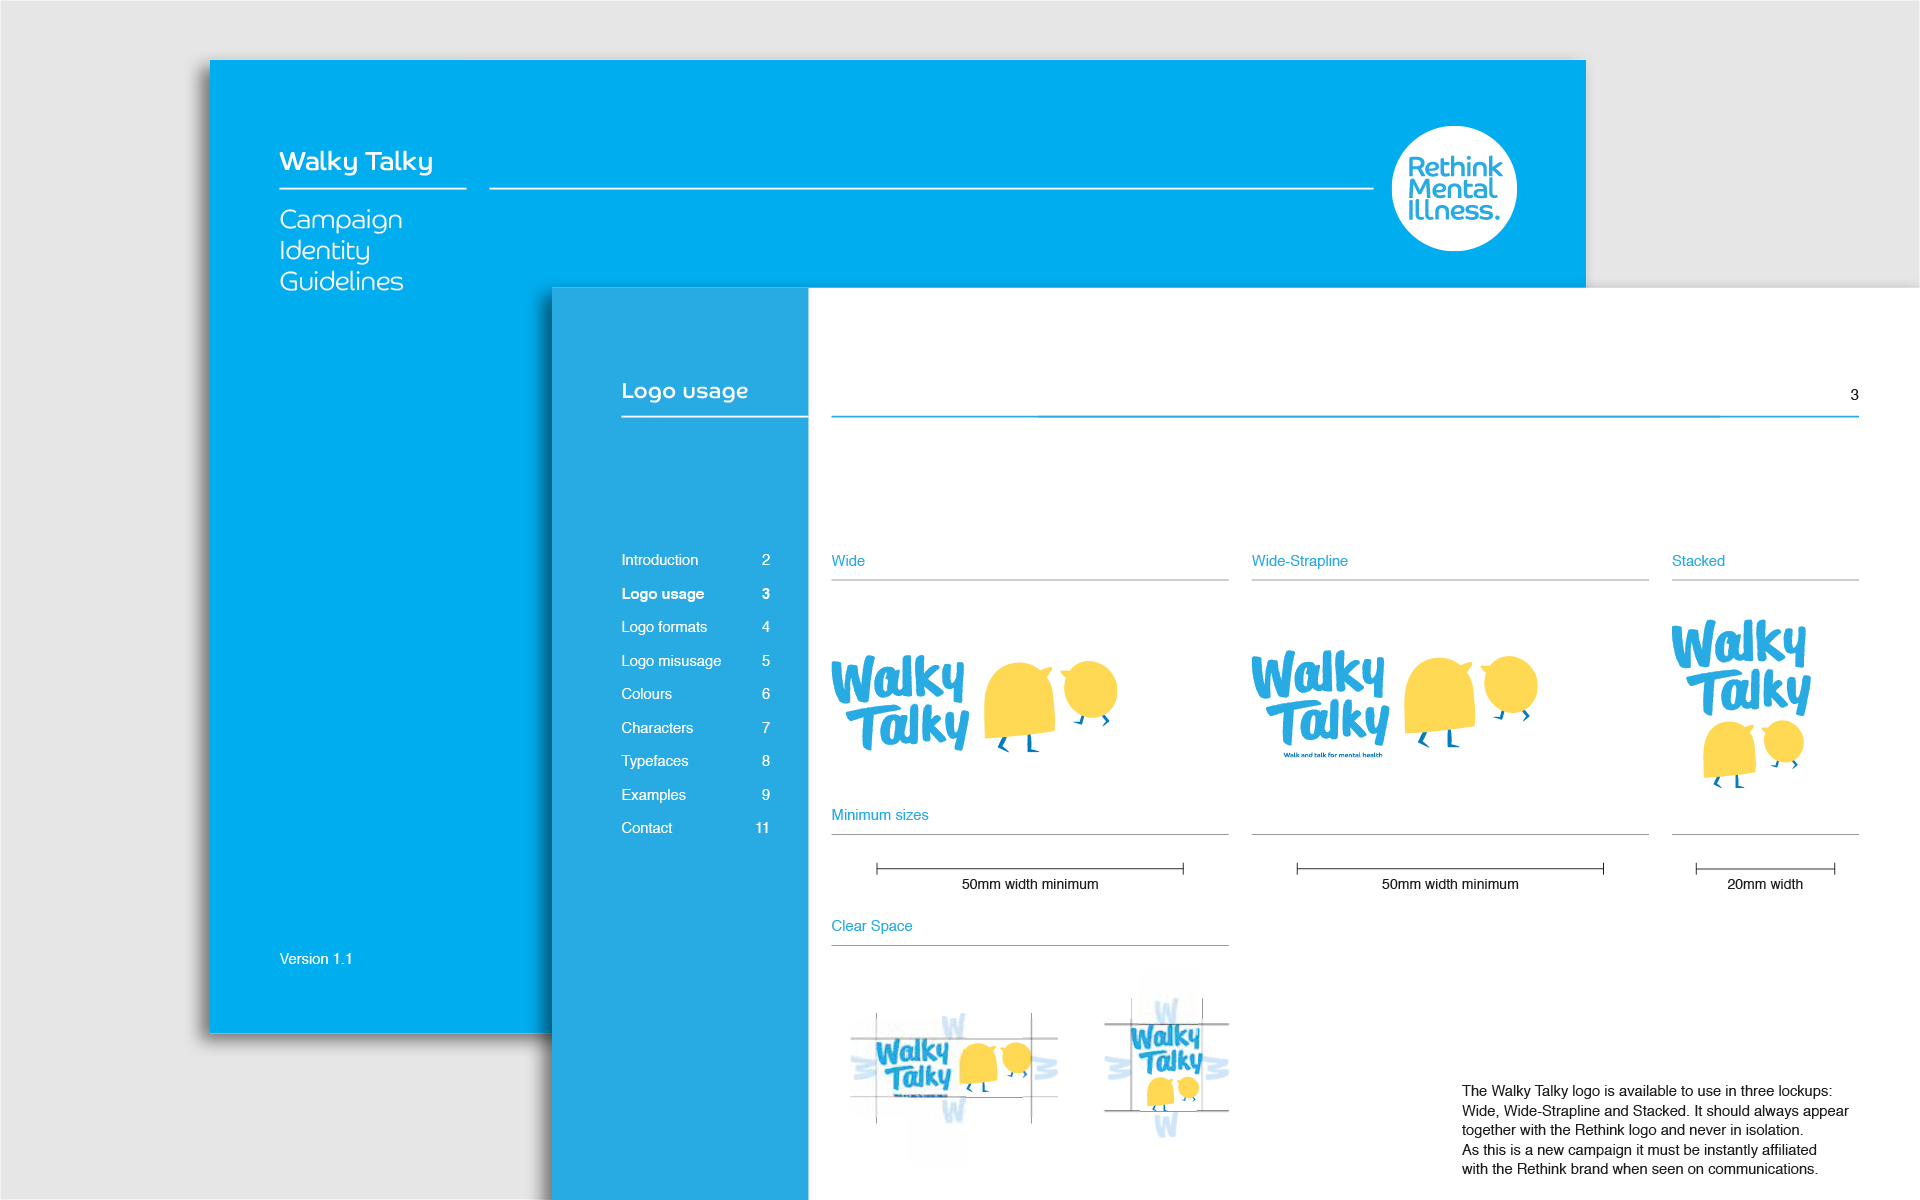 Walky Talky campaign visual identity guidelines